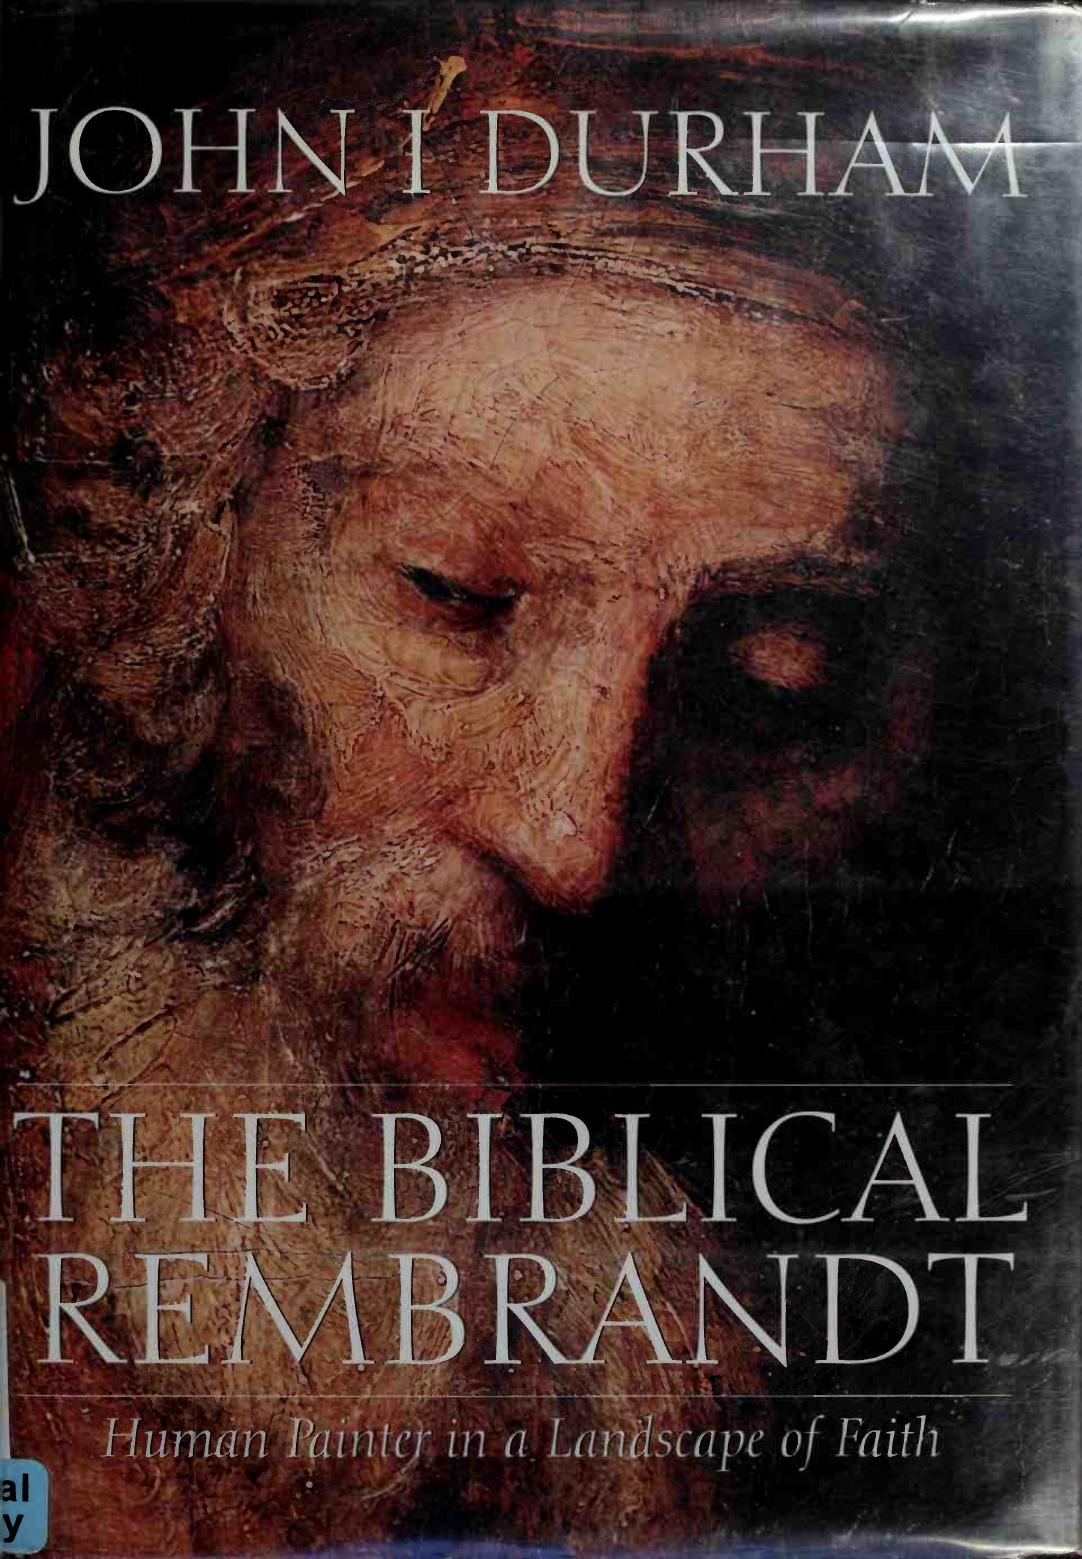 The Biblical Rembrandt by Human Painter in a Landscape of Faith (Art Ebook)